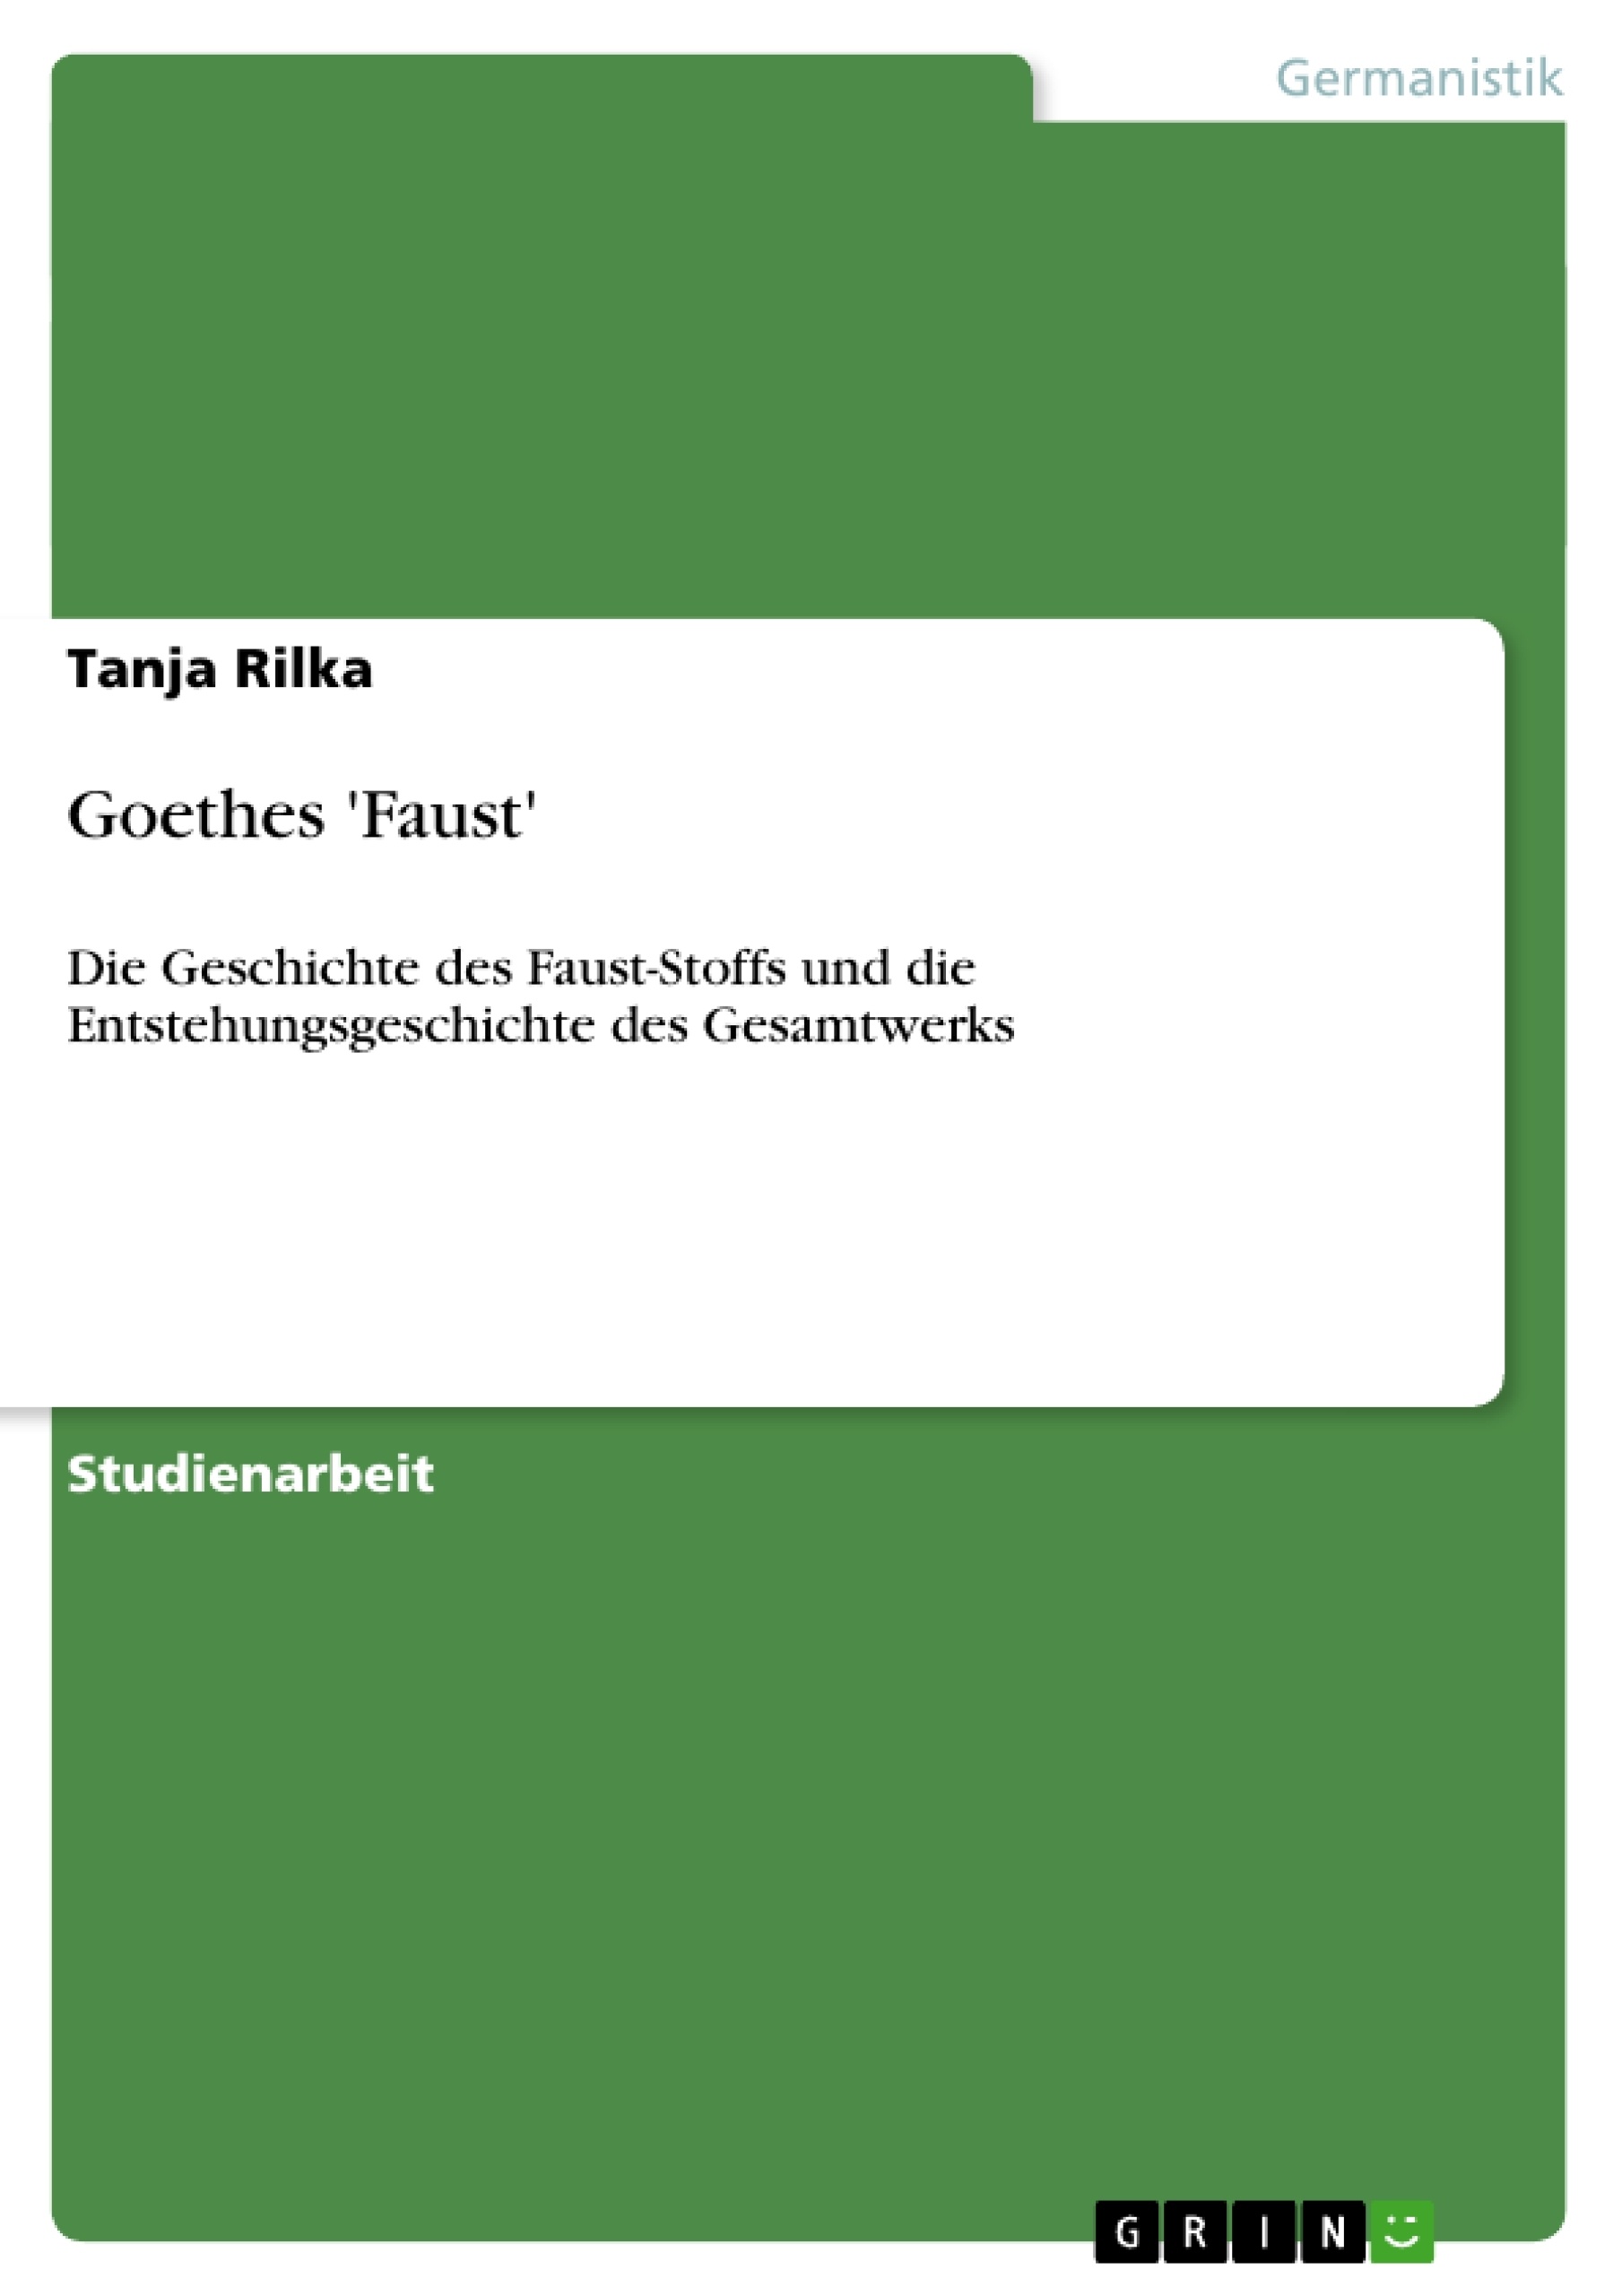 Título: Goethes 'Faust'